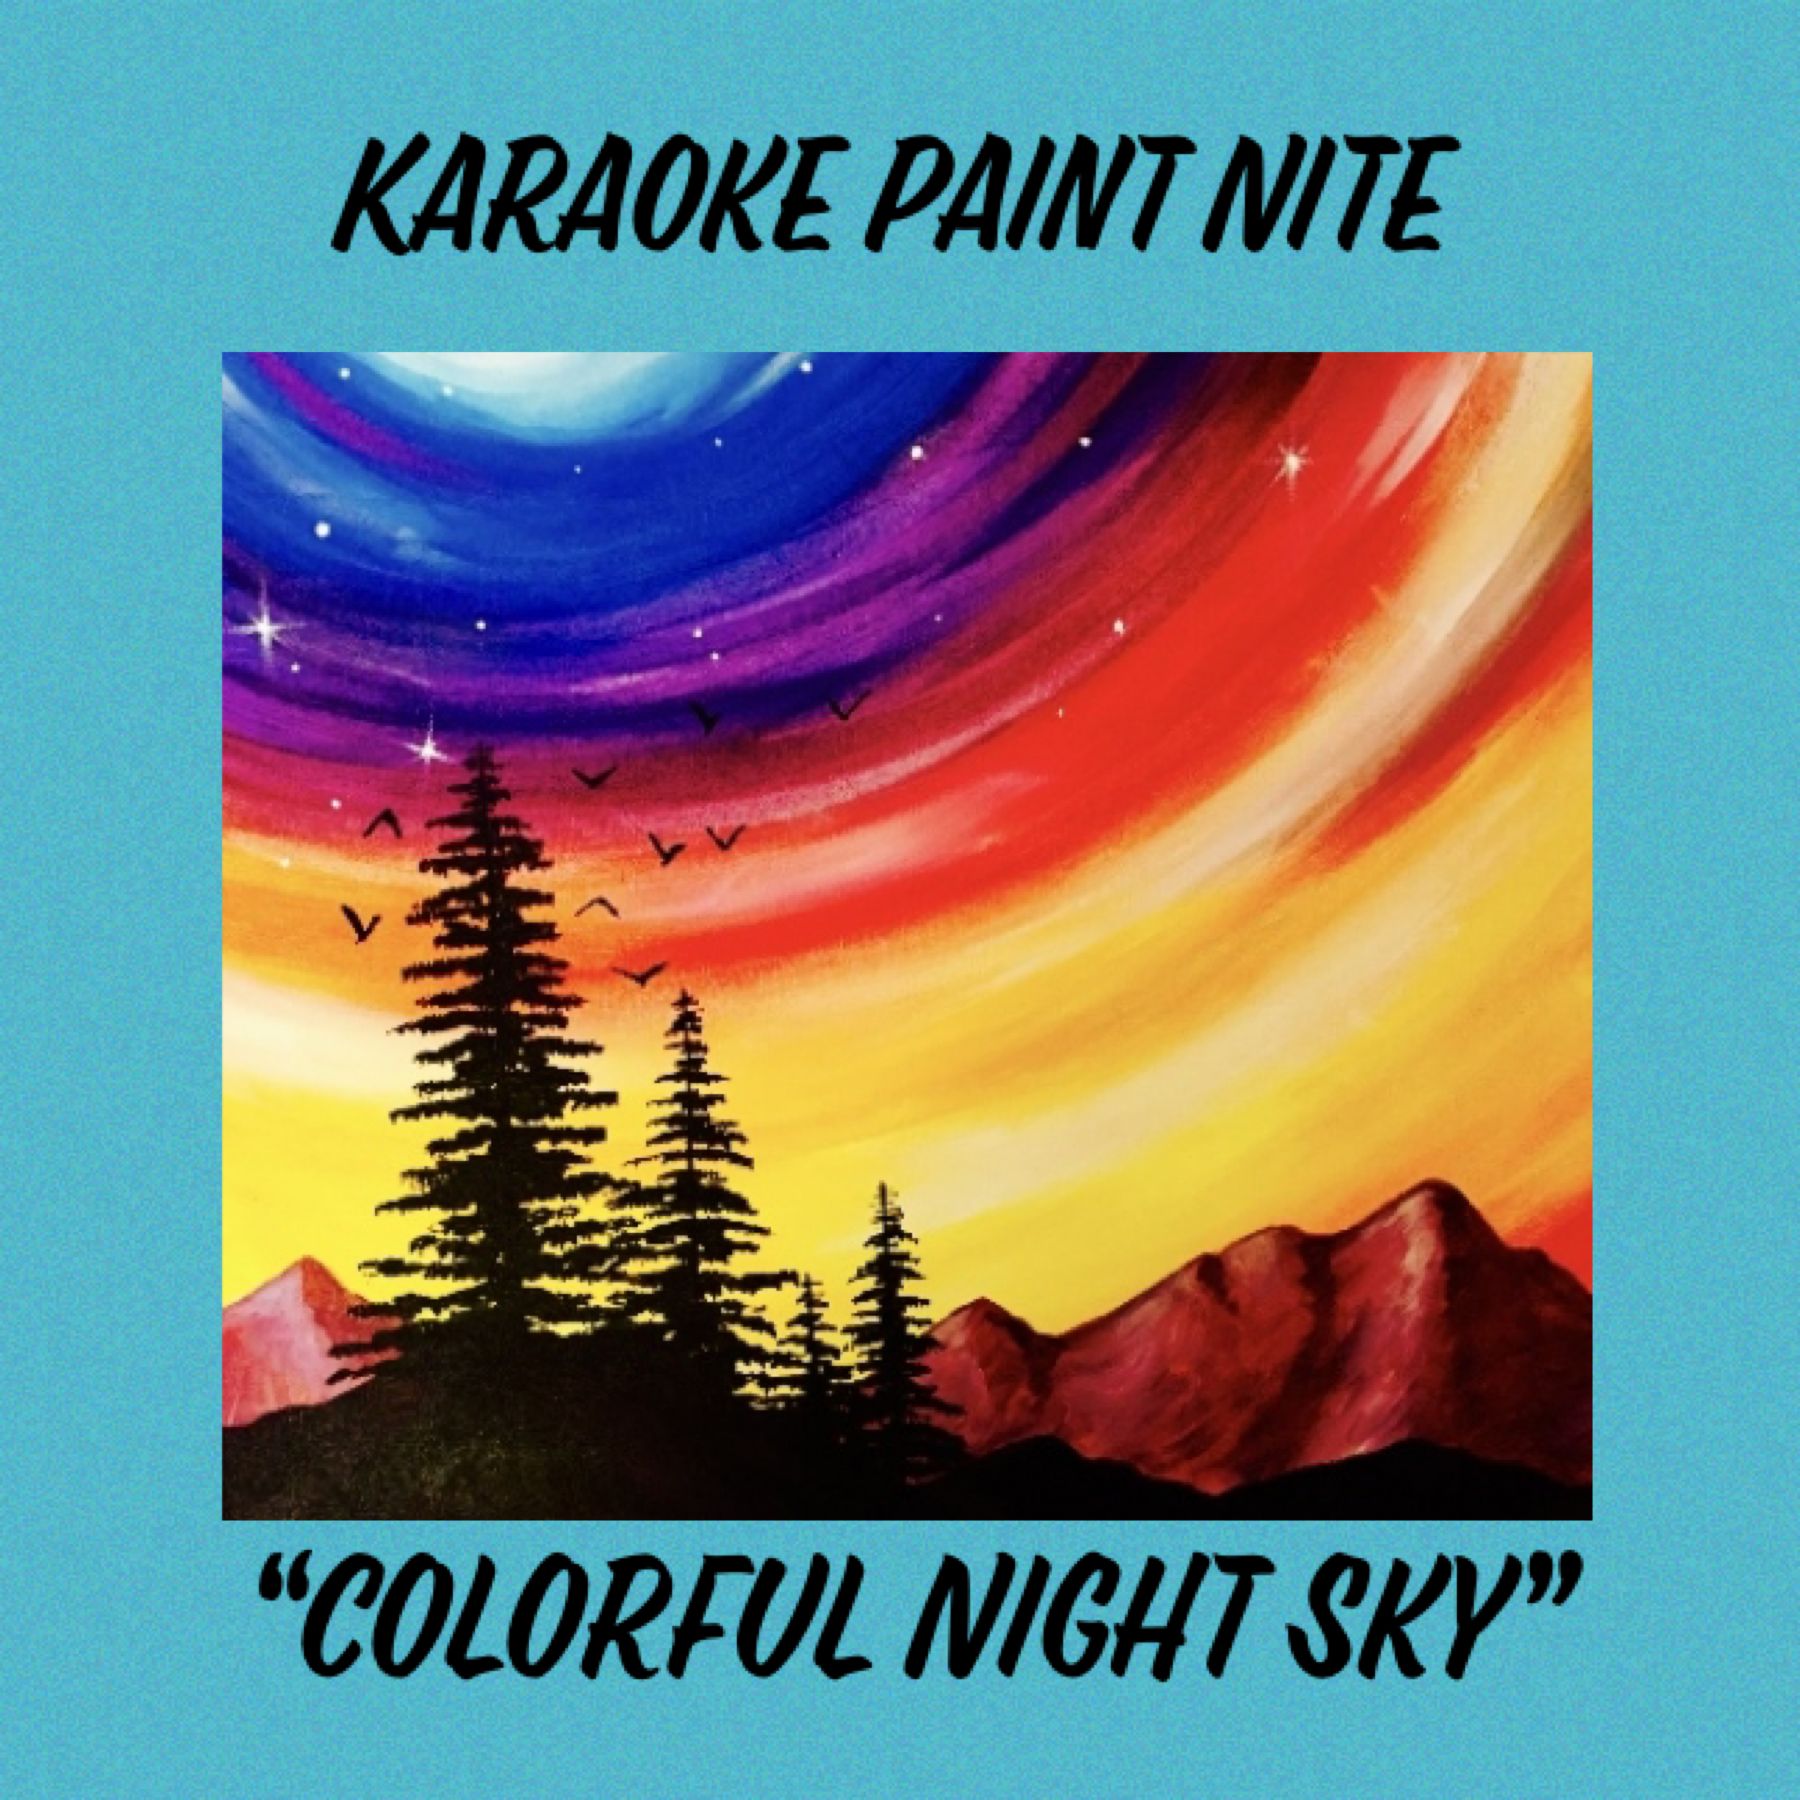 A Karaoke Paint Nite Colorful Nite Sky experience project by Yaymaker